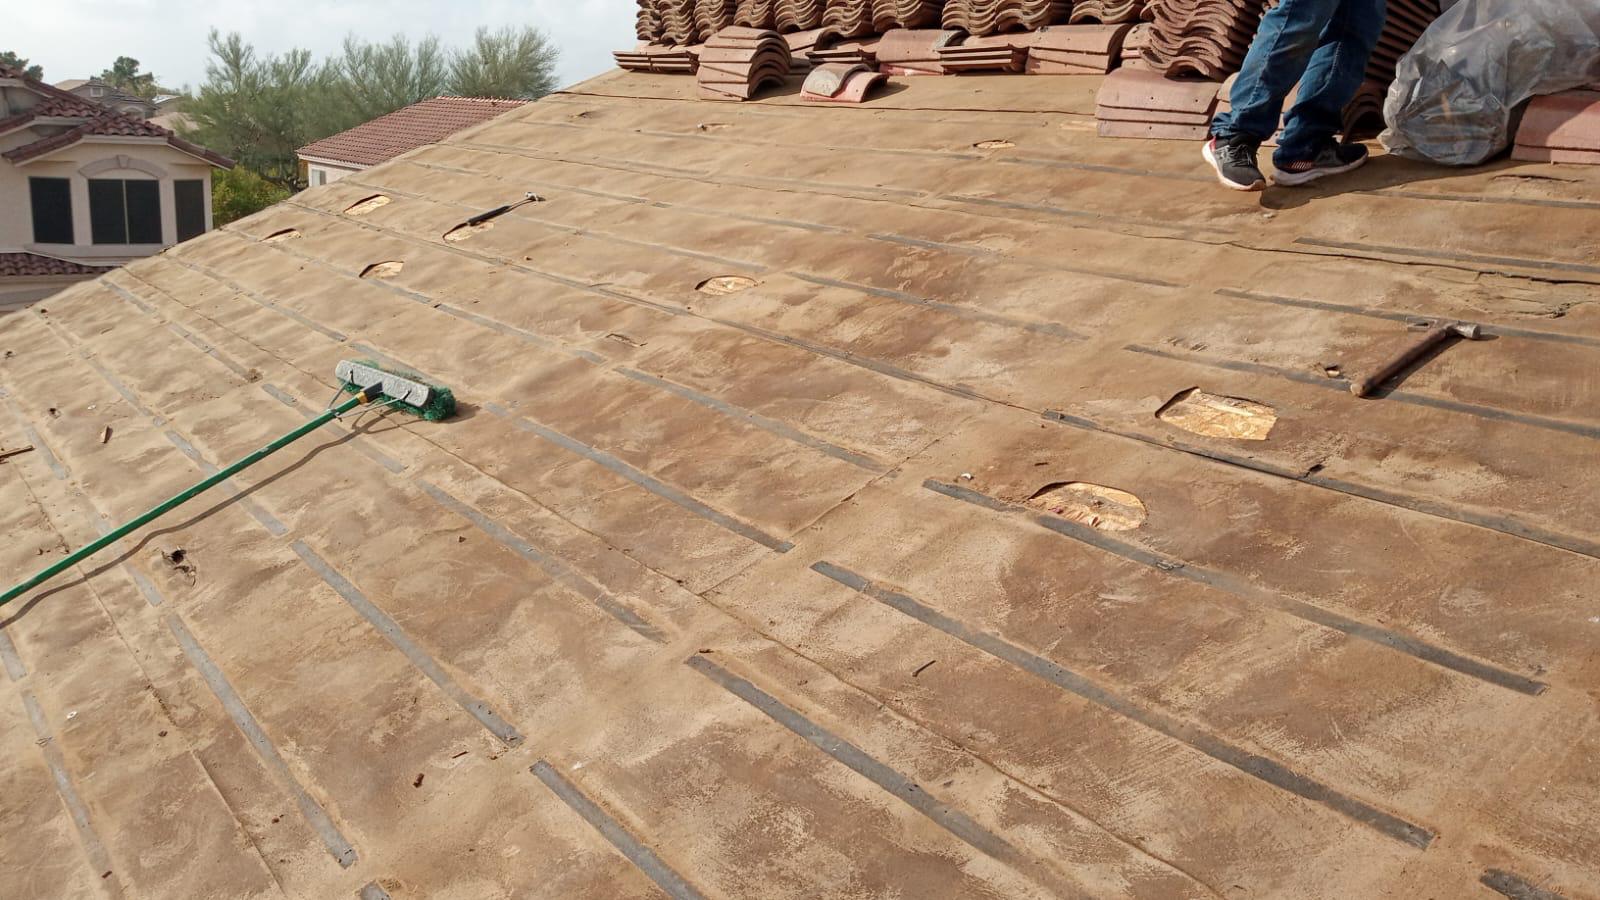 Professional roofers performing tile re-felt in Chandler.